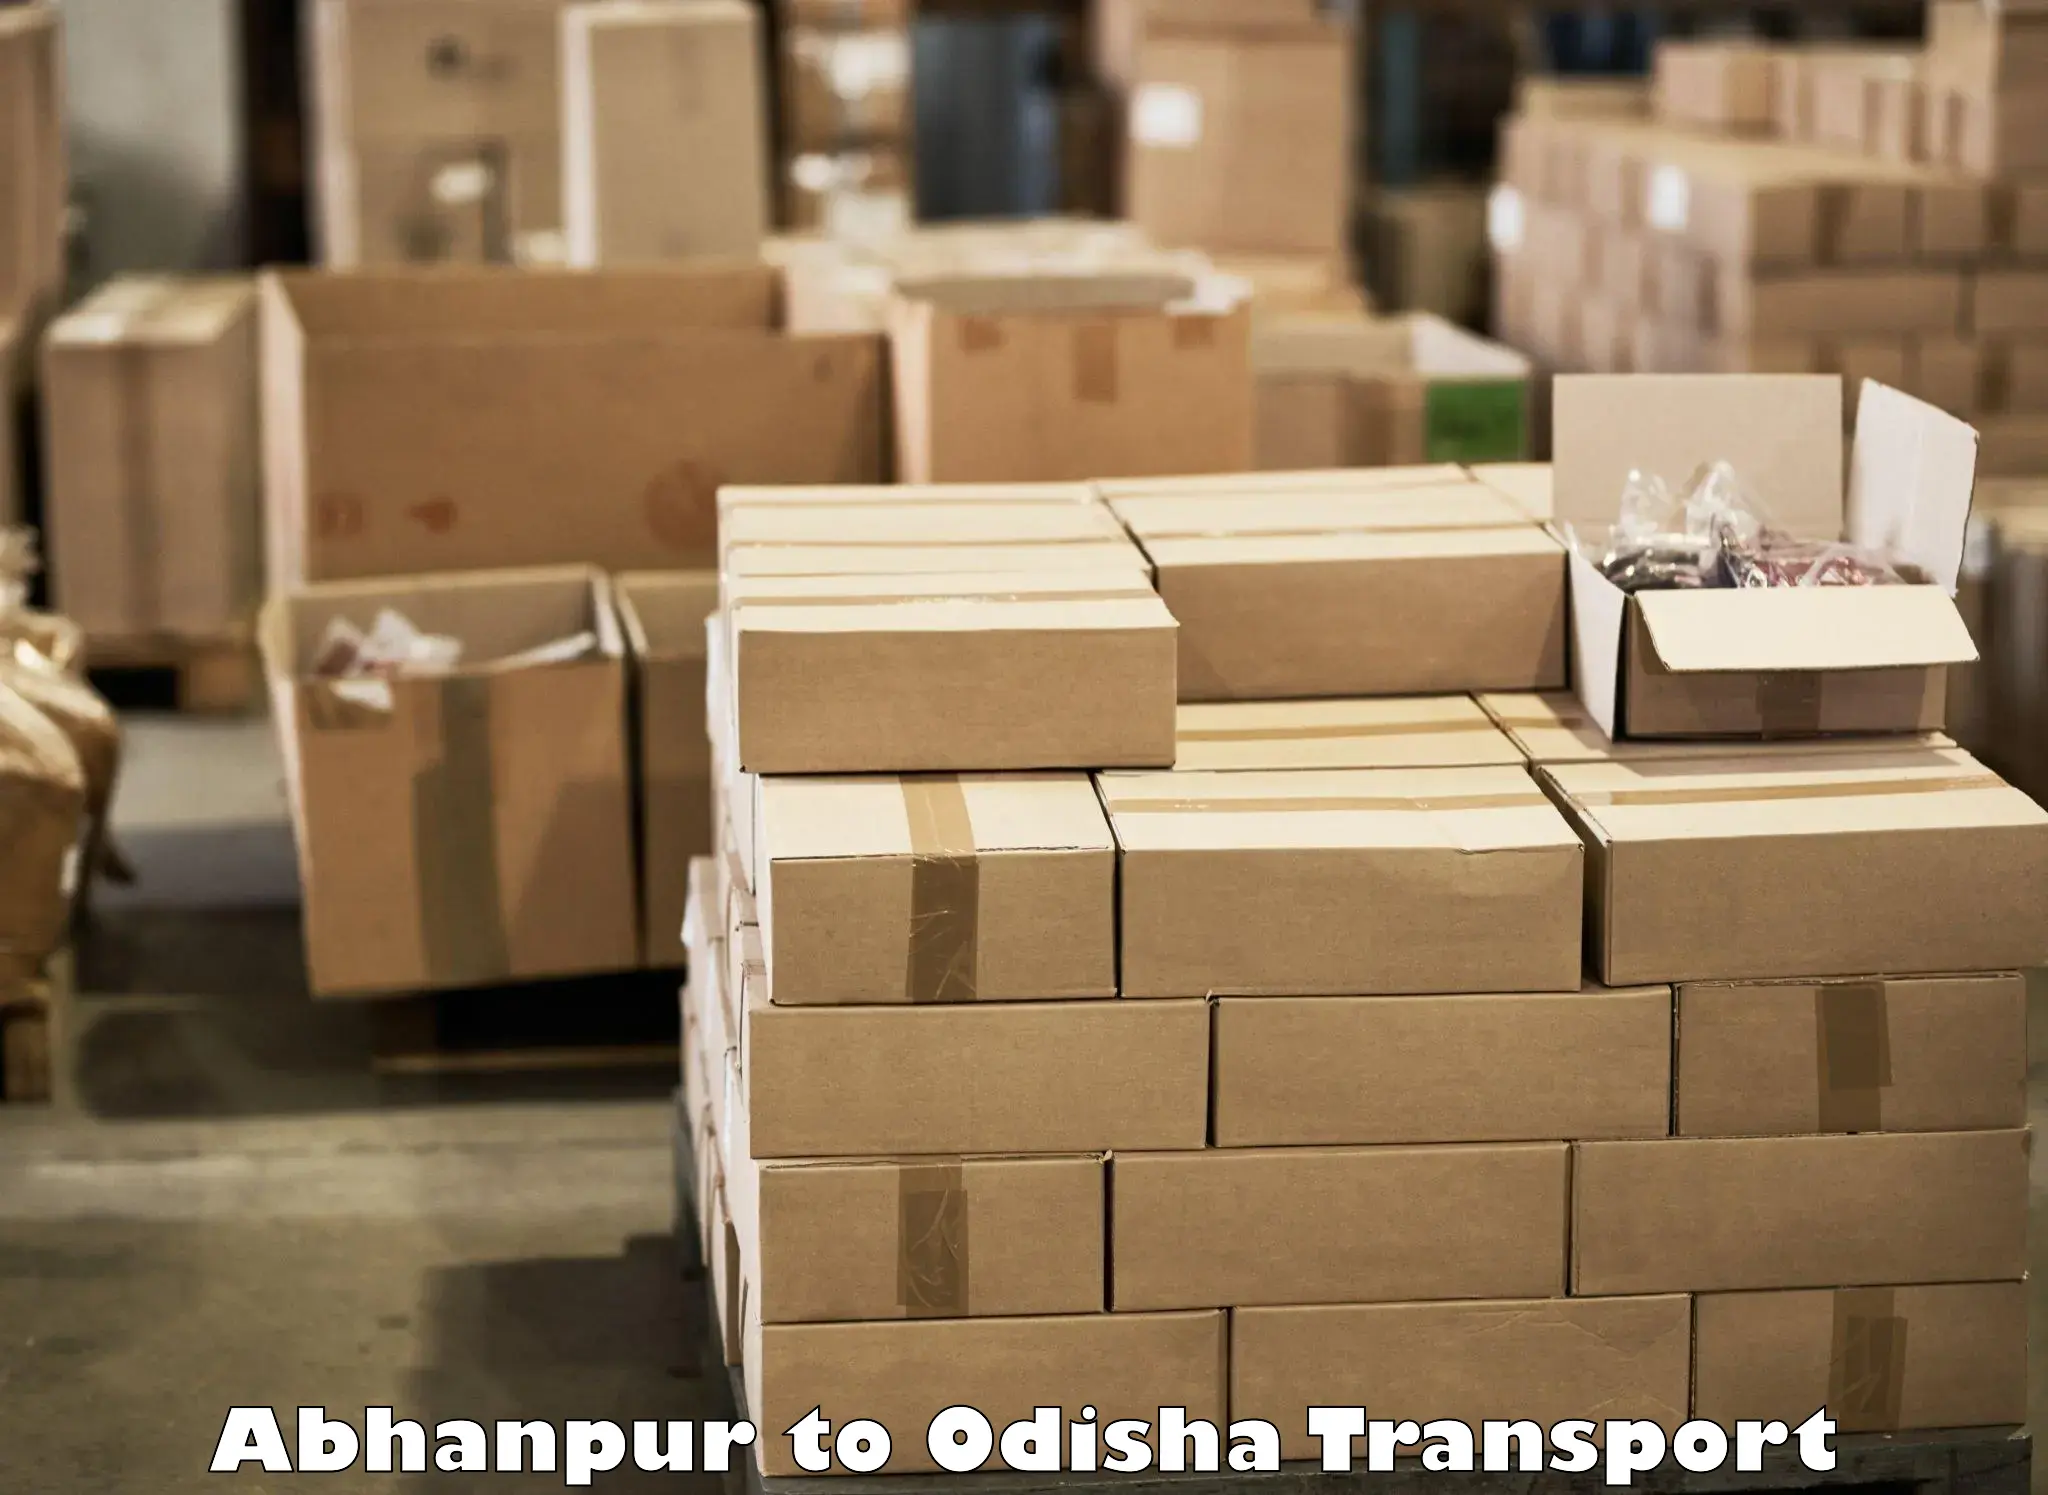 Vehicle transport services Abhanpur to Rourkela